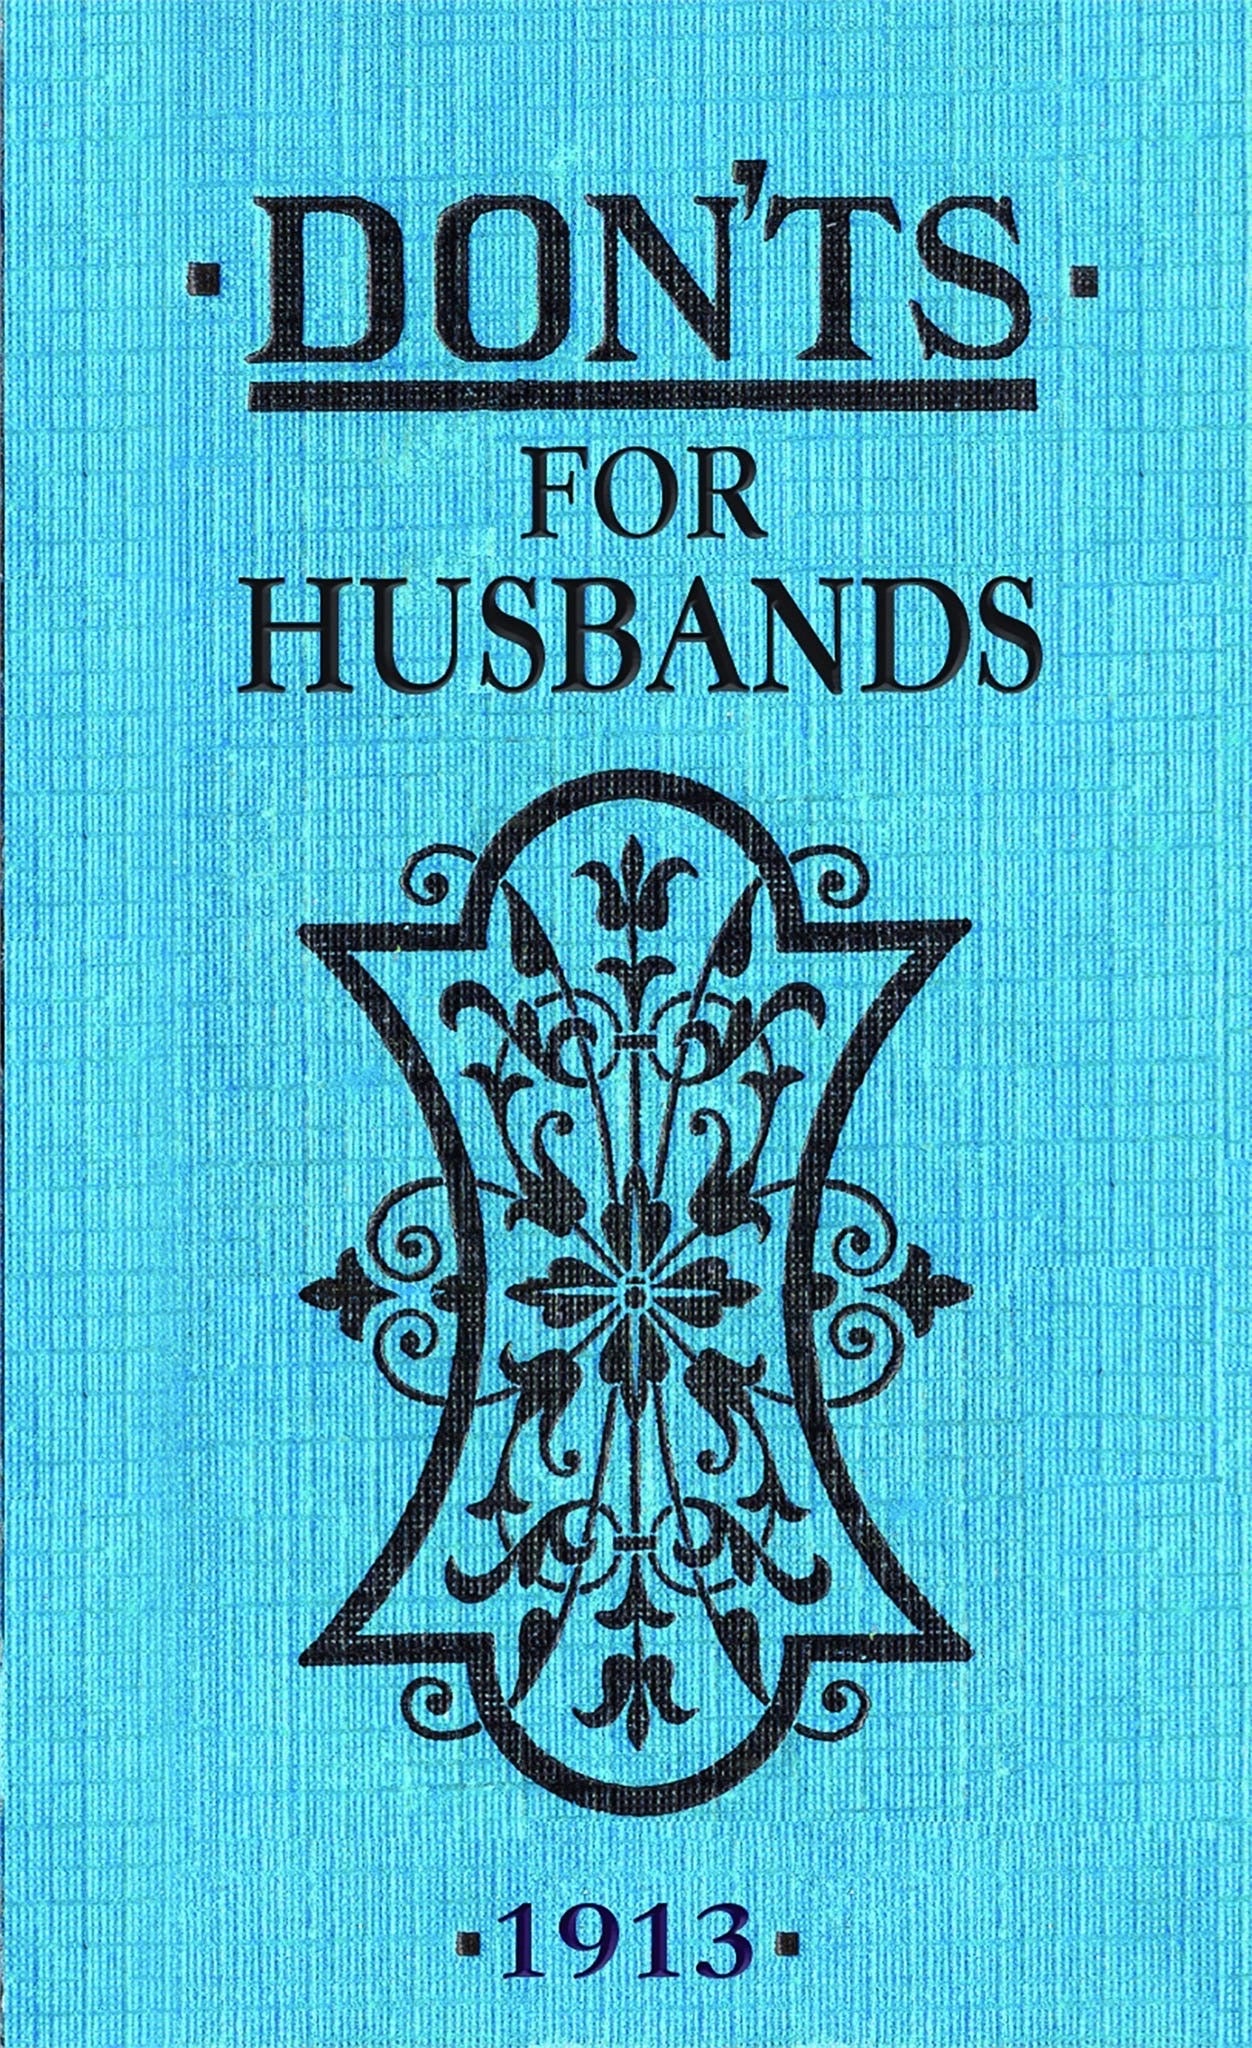 Don'ts for Husbands (from 1913)